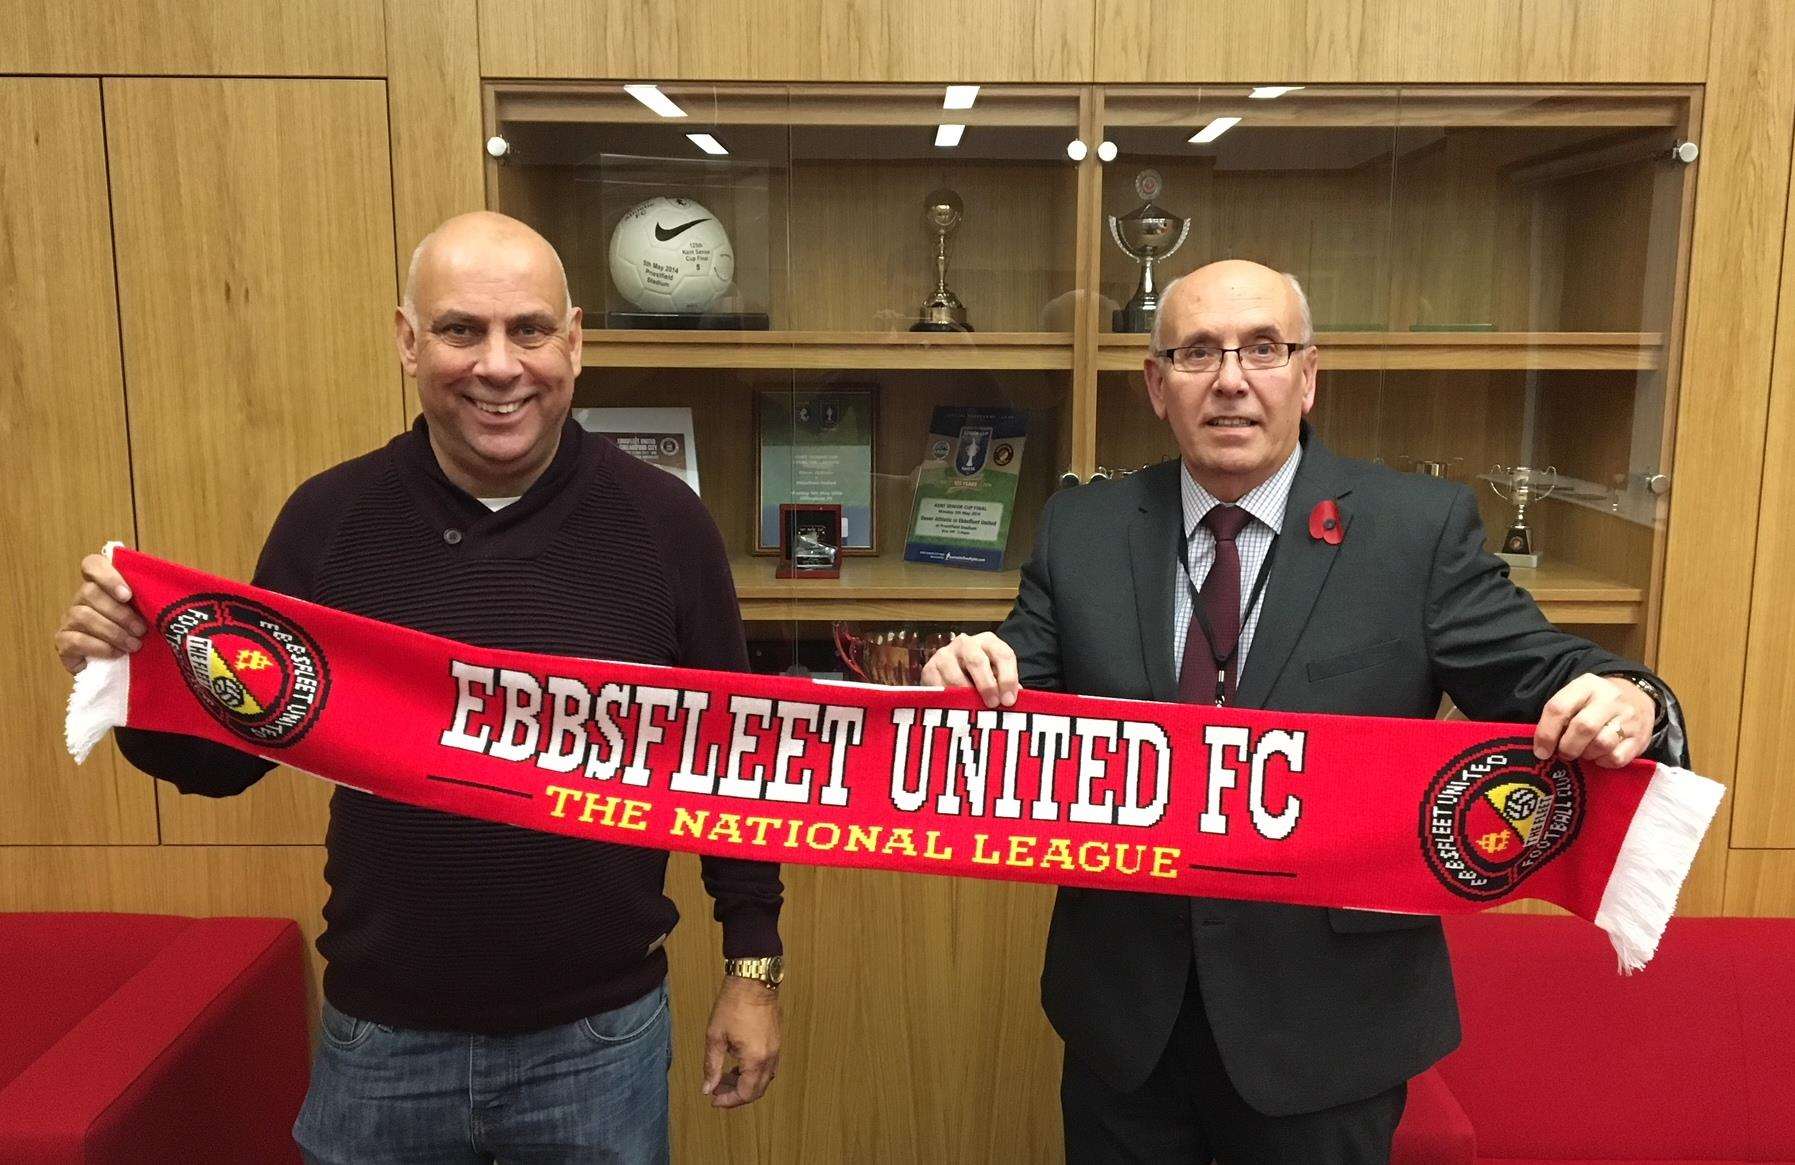 Ebbsfleet United manager Garry Hill with managing director Dave Archer